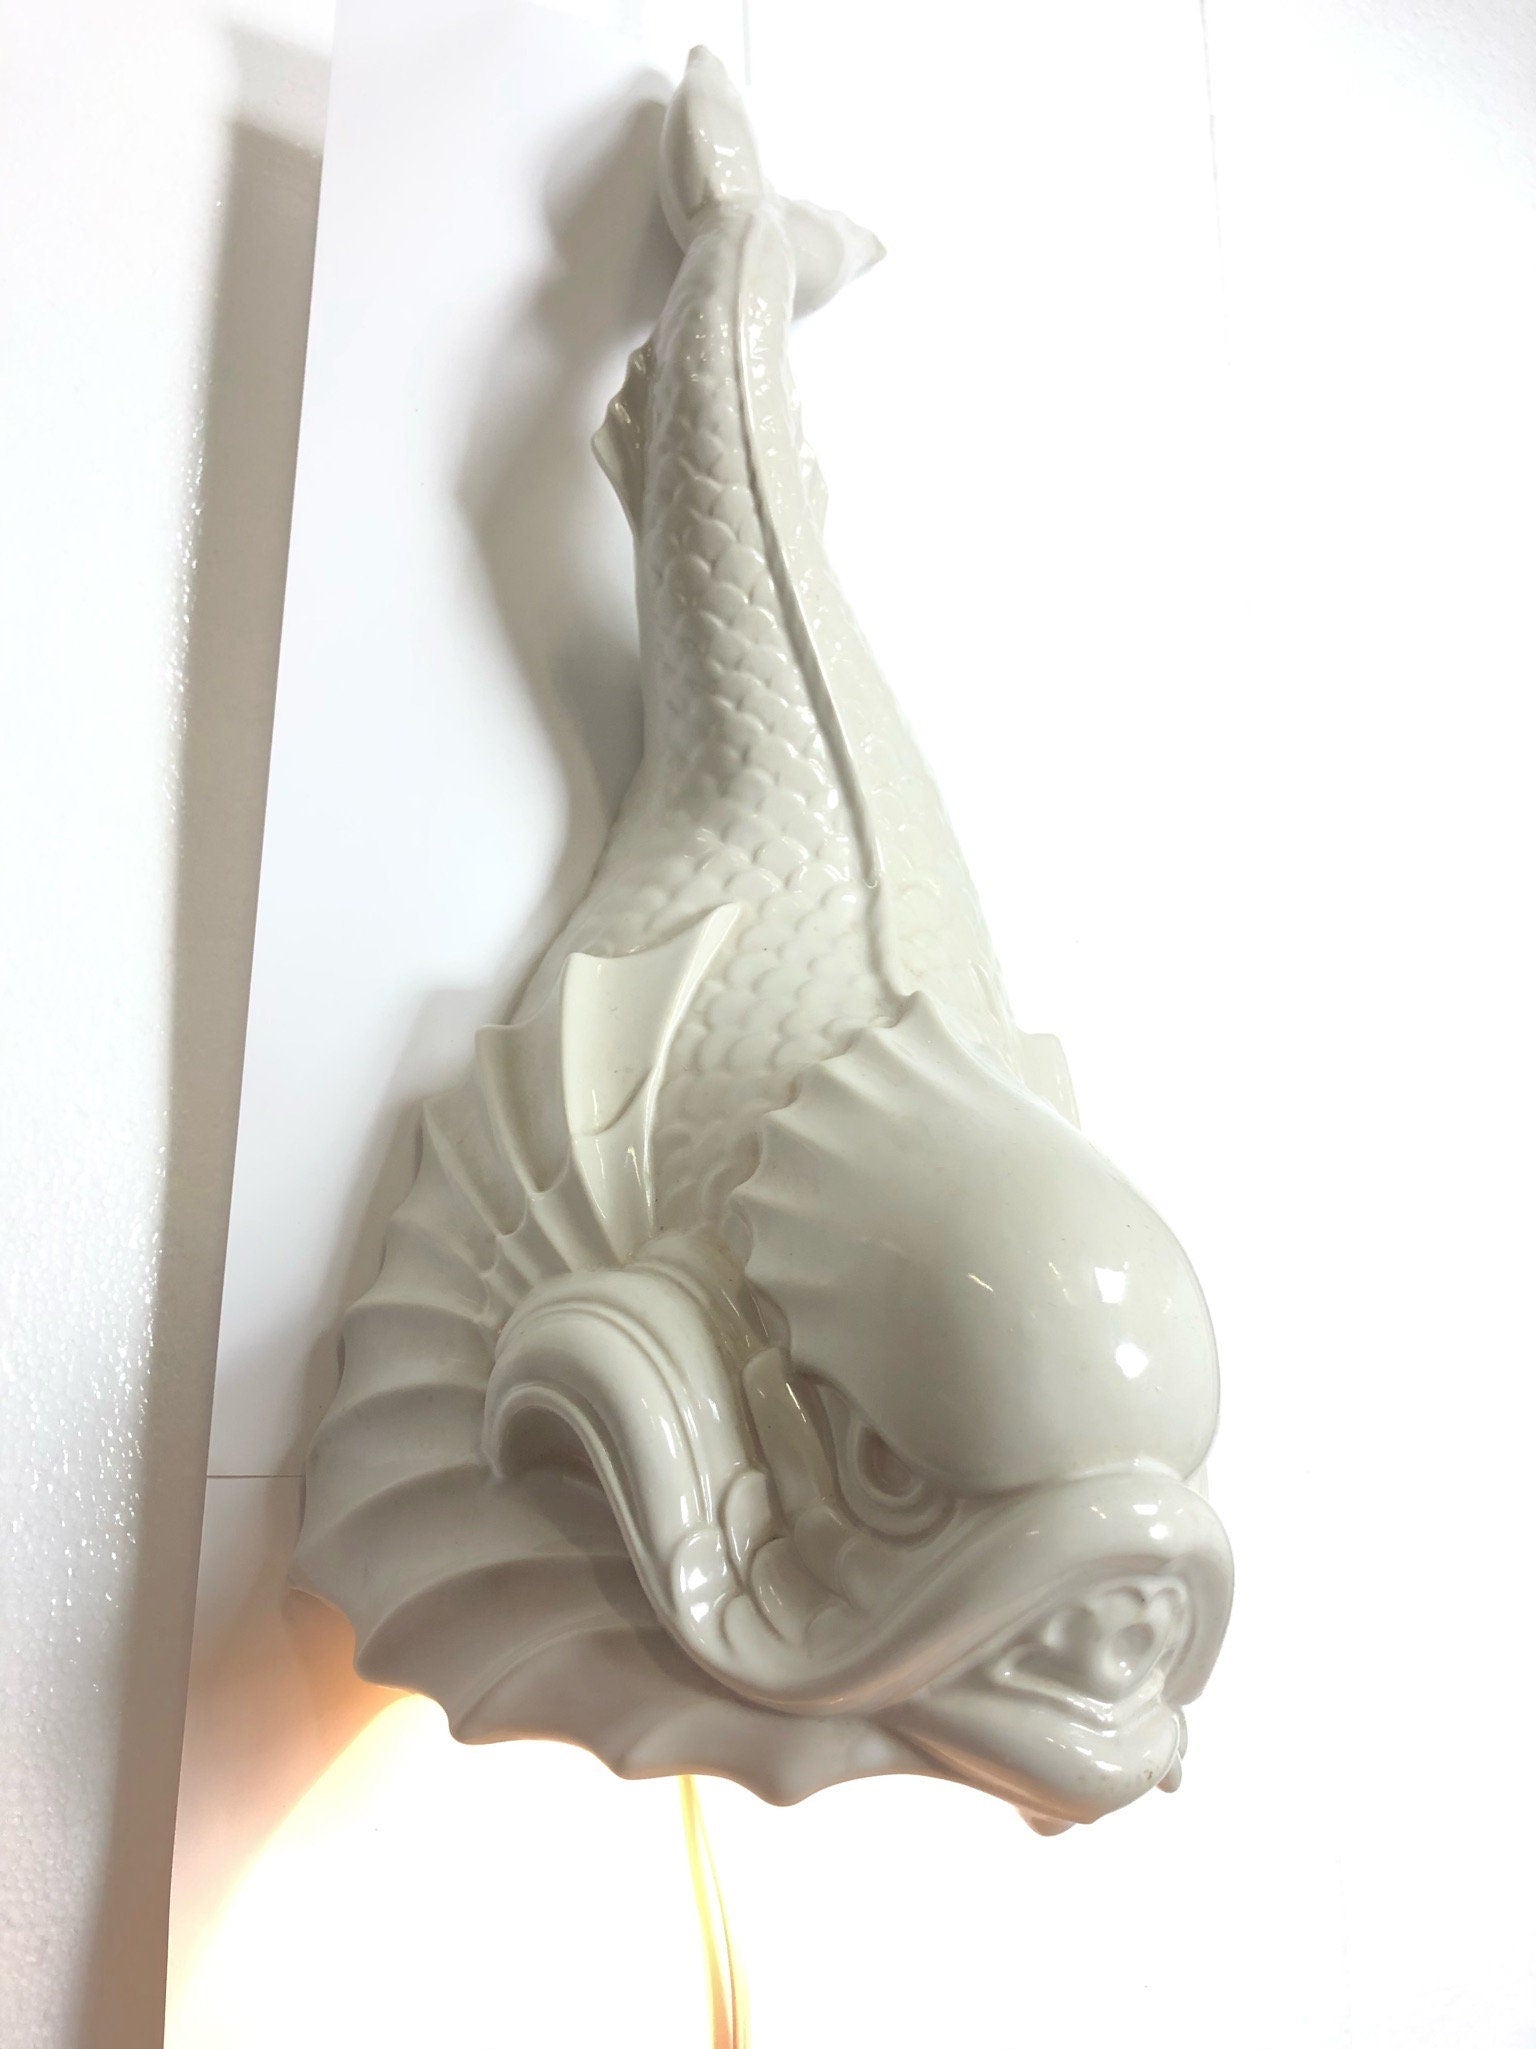 Porcelain Koi Wall Planter With Light Sconce by Charelton